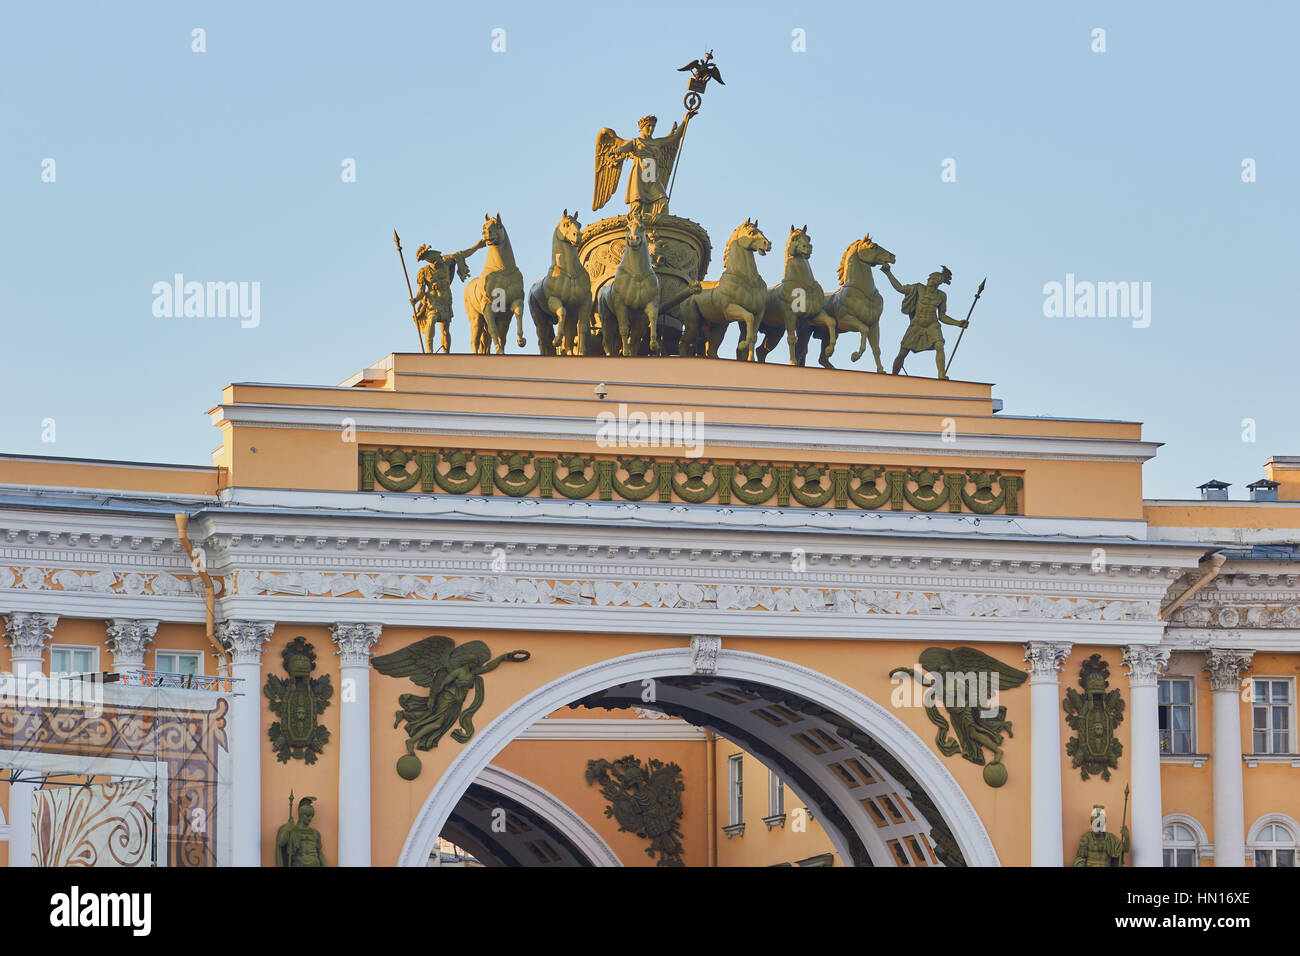 Sculpture group of Victory in her chariot on the triumphal arch connecting the two wings of the General Staff Building, Palace Square, St Petersburg Stock Photo